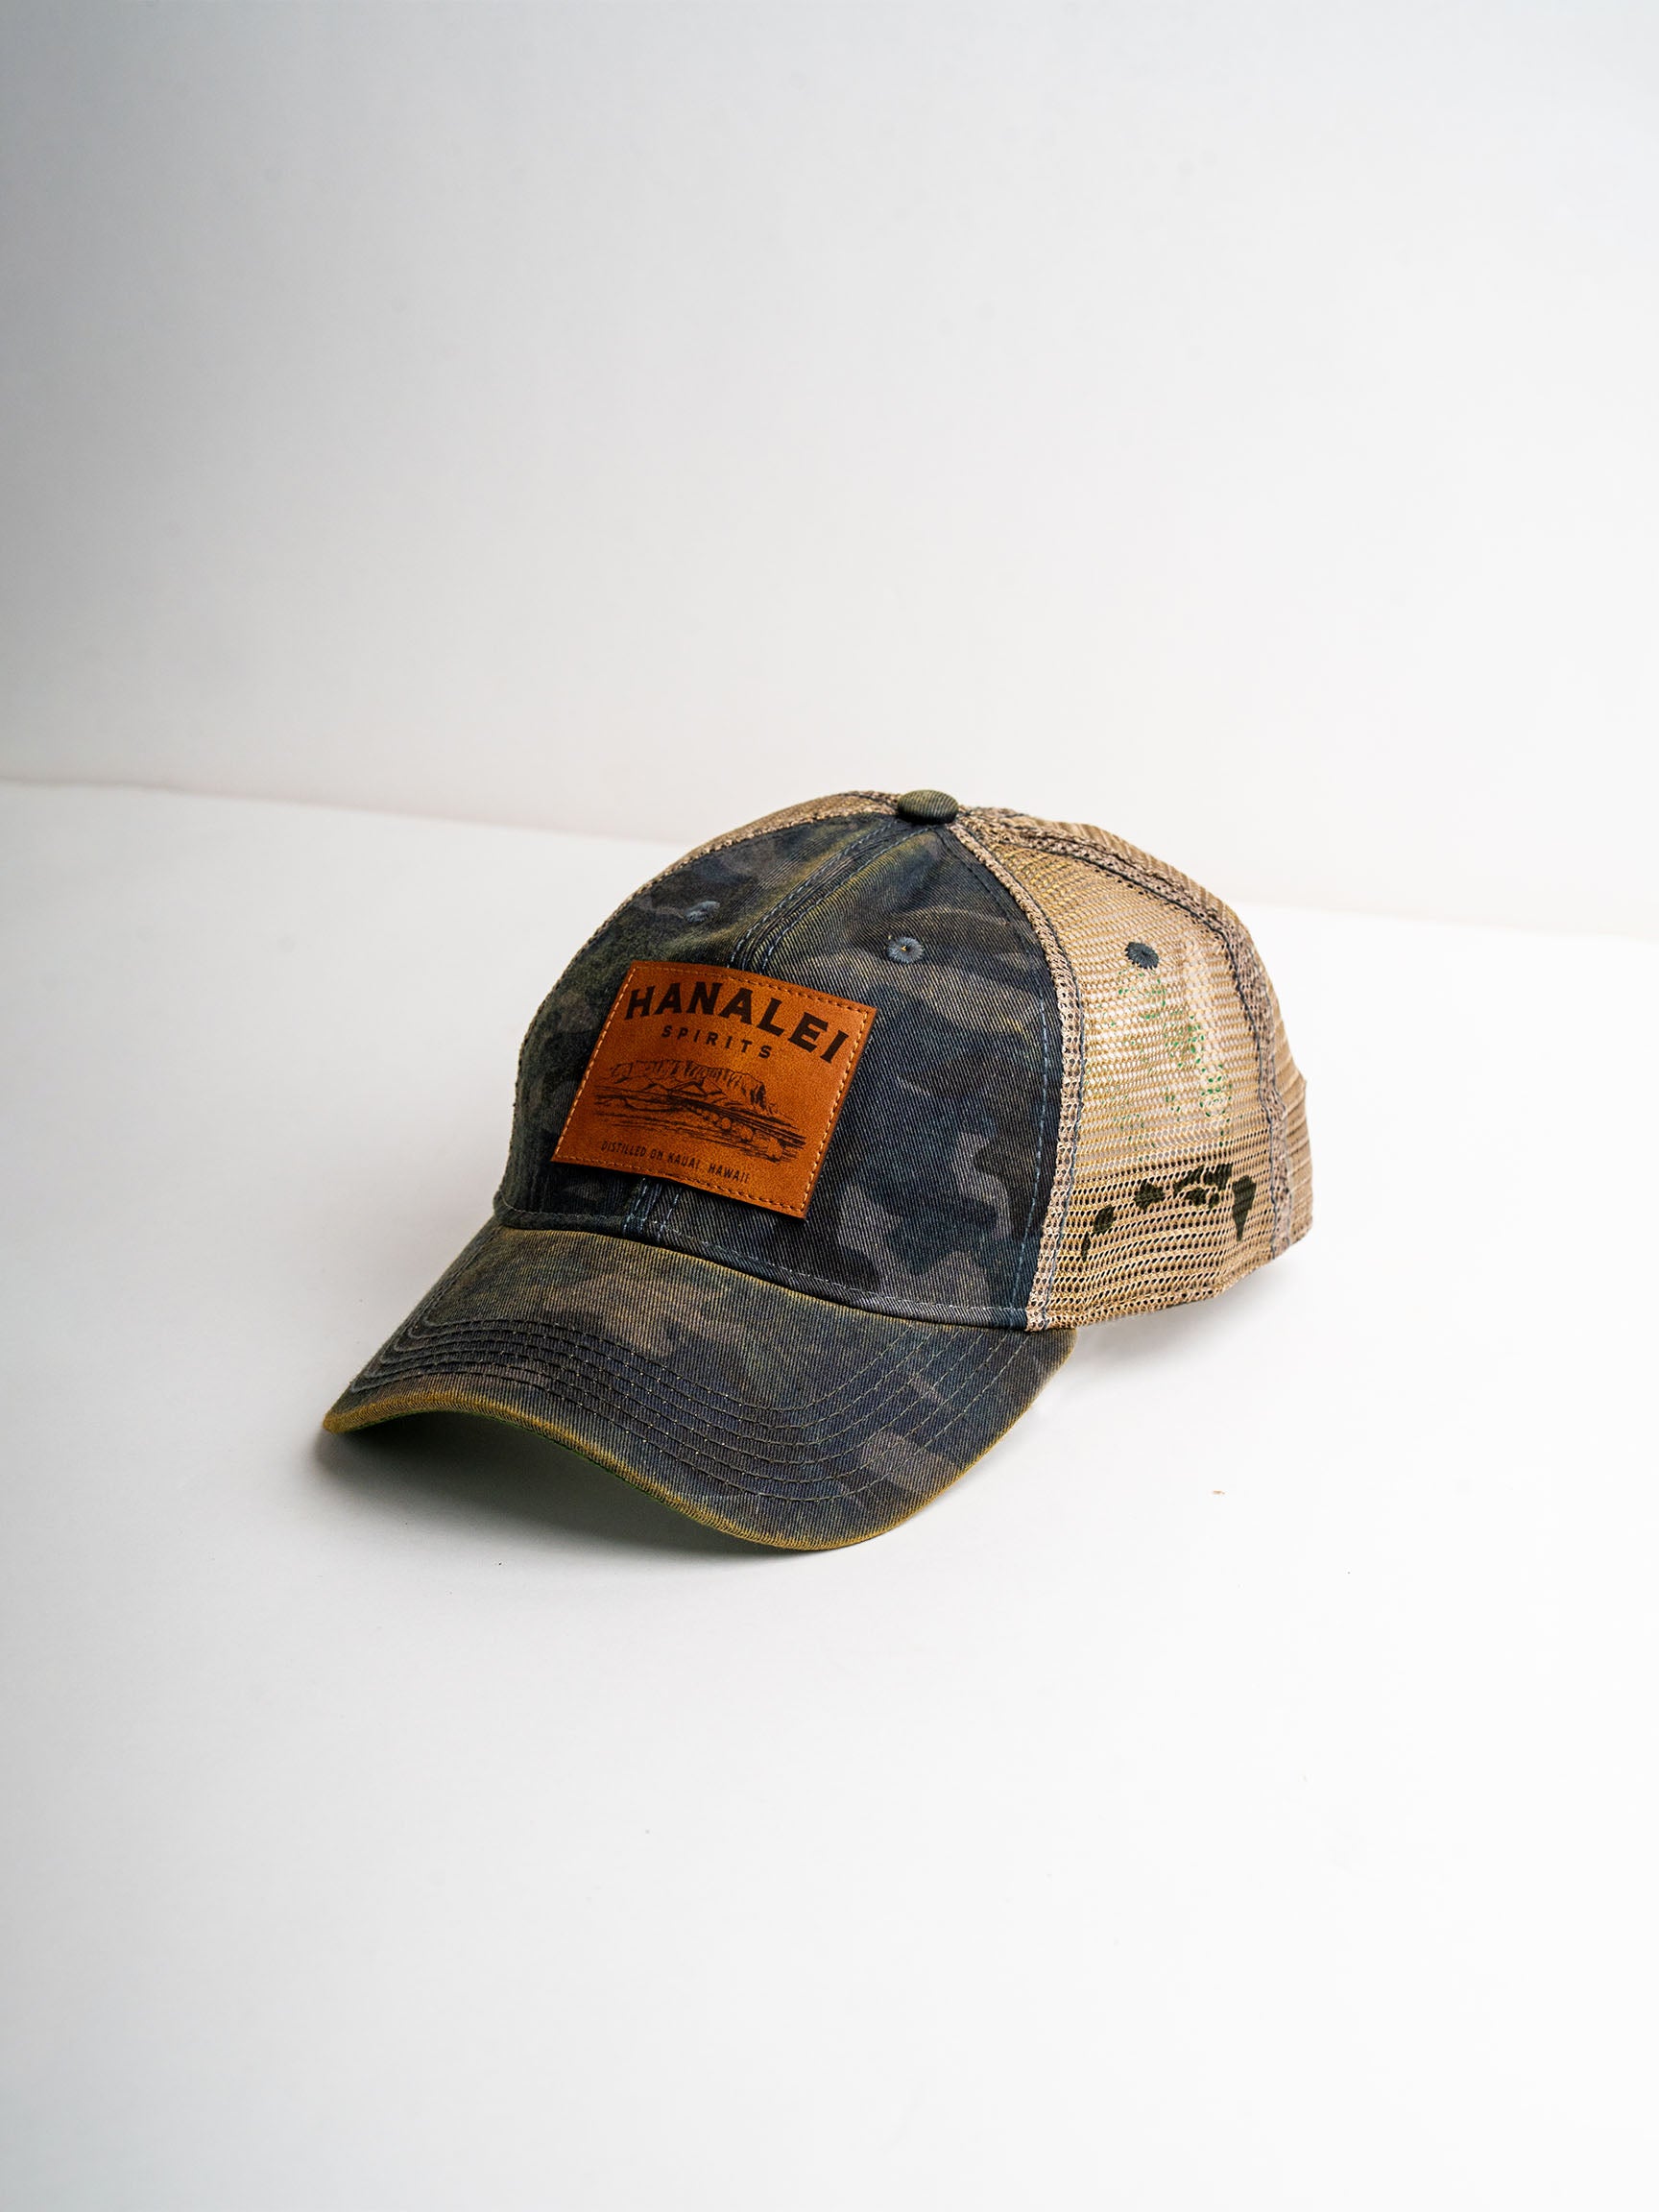 We The Essentials Camo Trucker Hat with Leather Patch